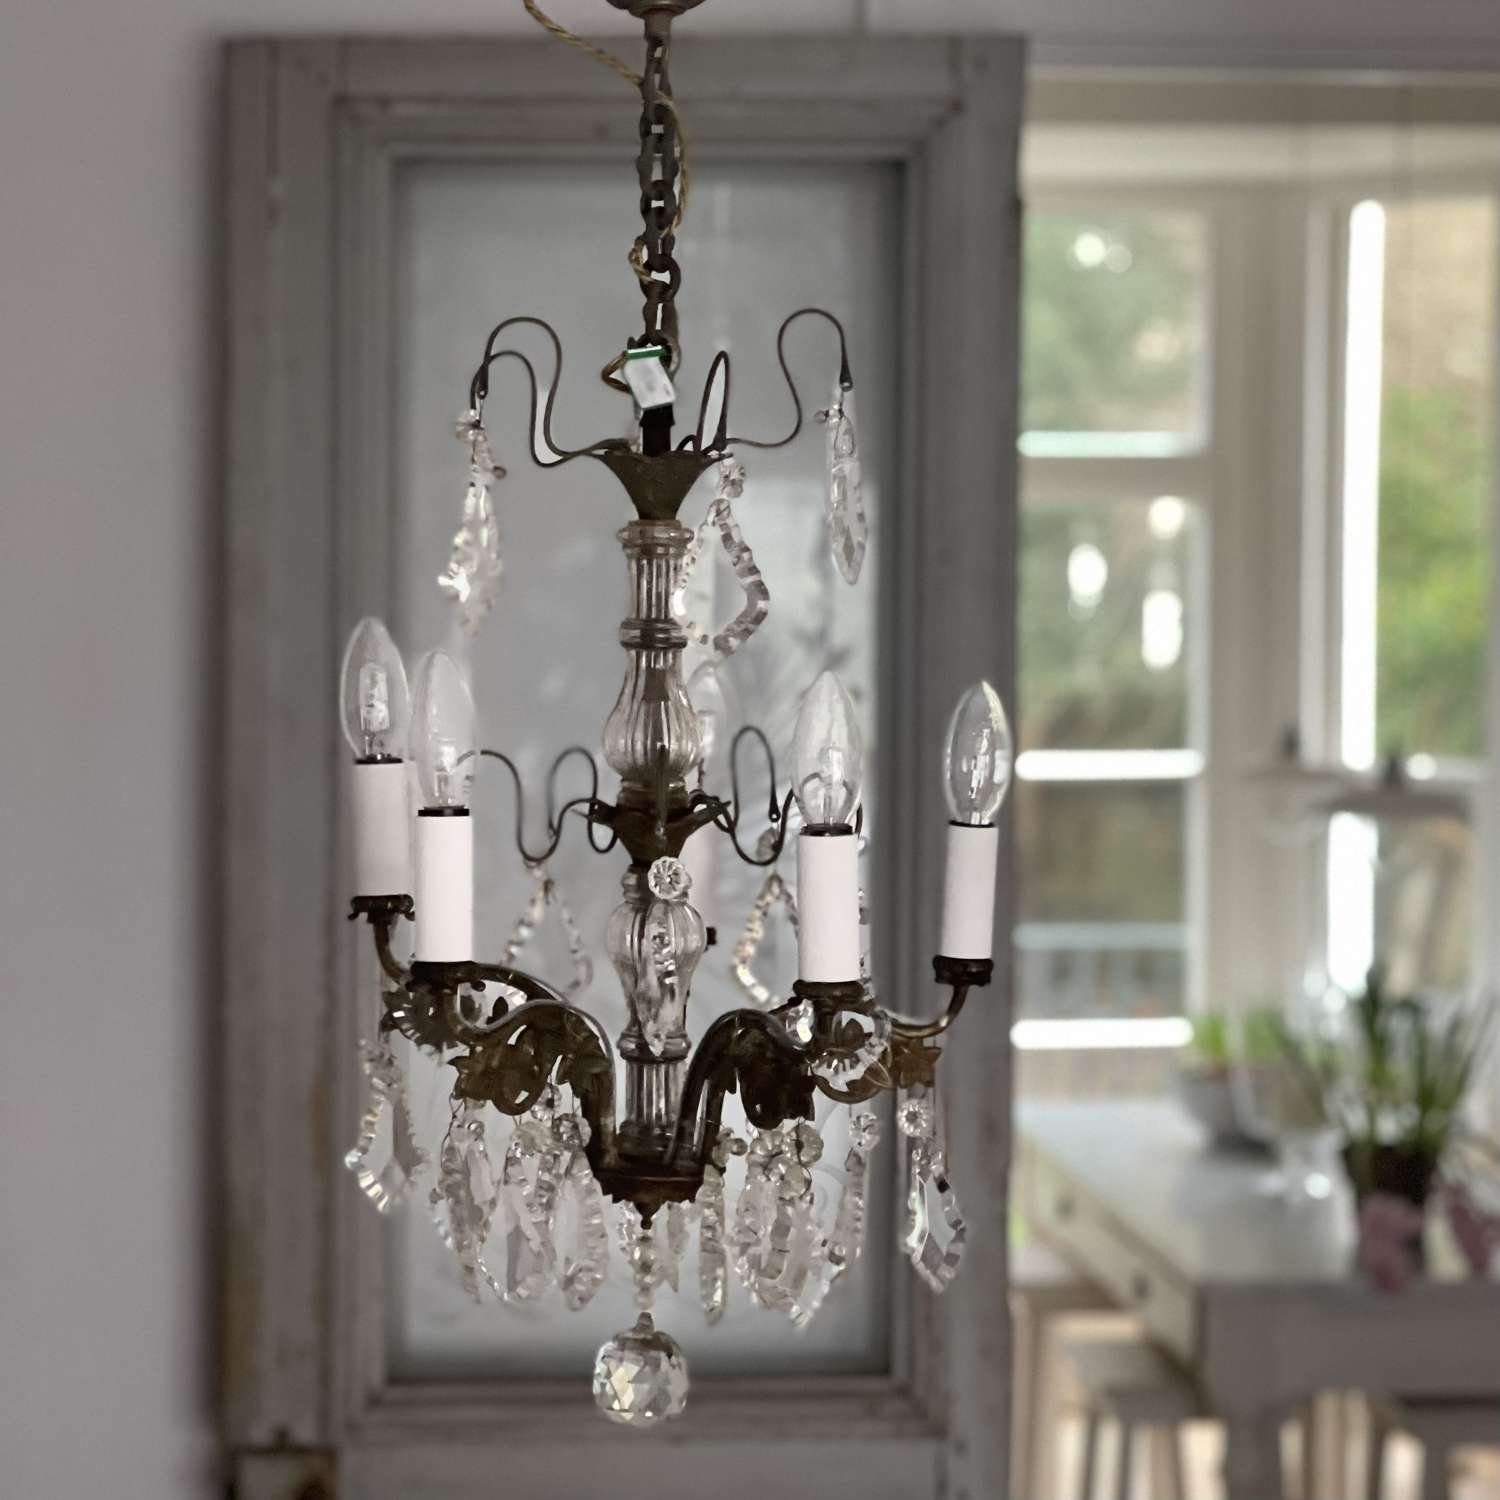 Antique French crystal chandelier - rewired